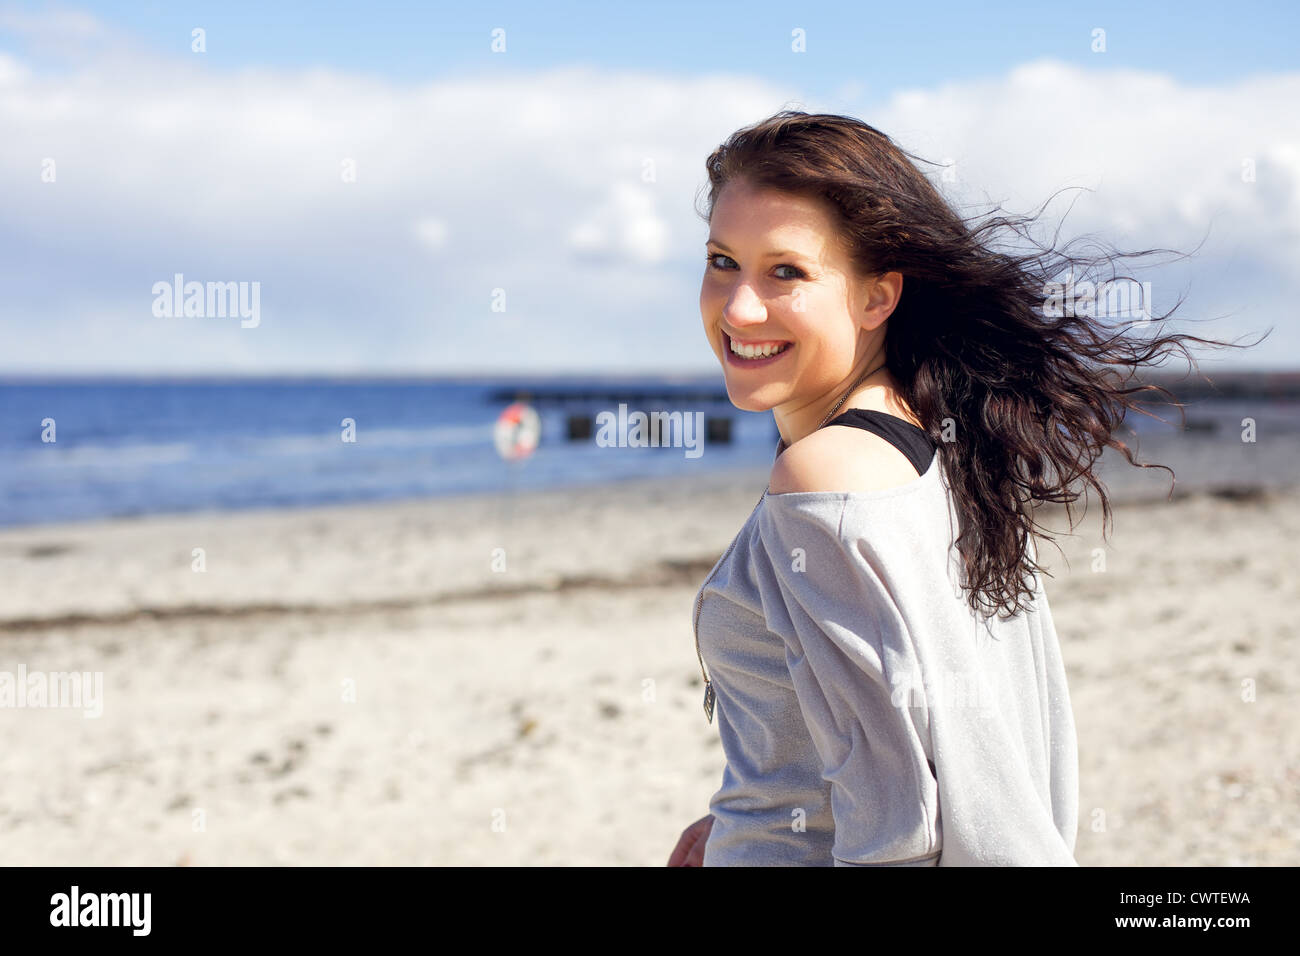 A young adult woman enjoying a walk along the beach in the summer Stock Photo